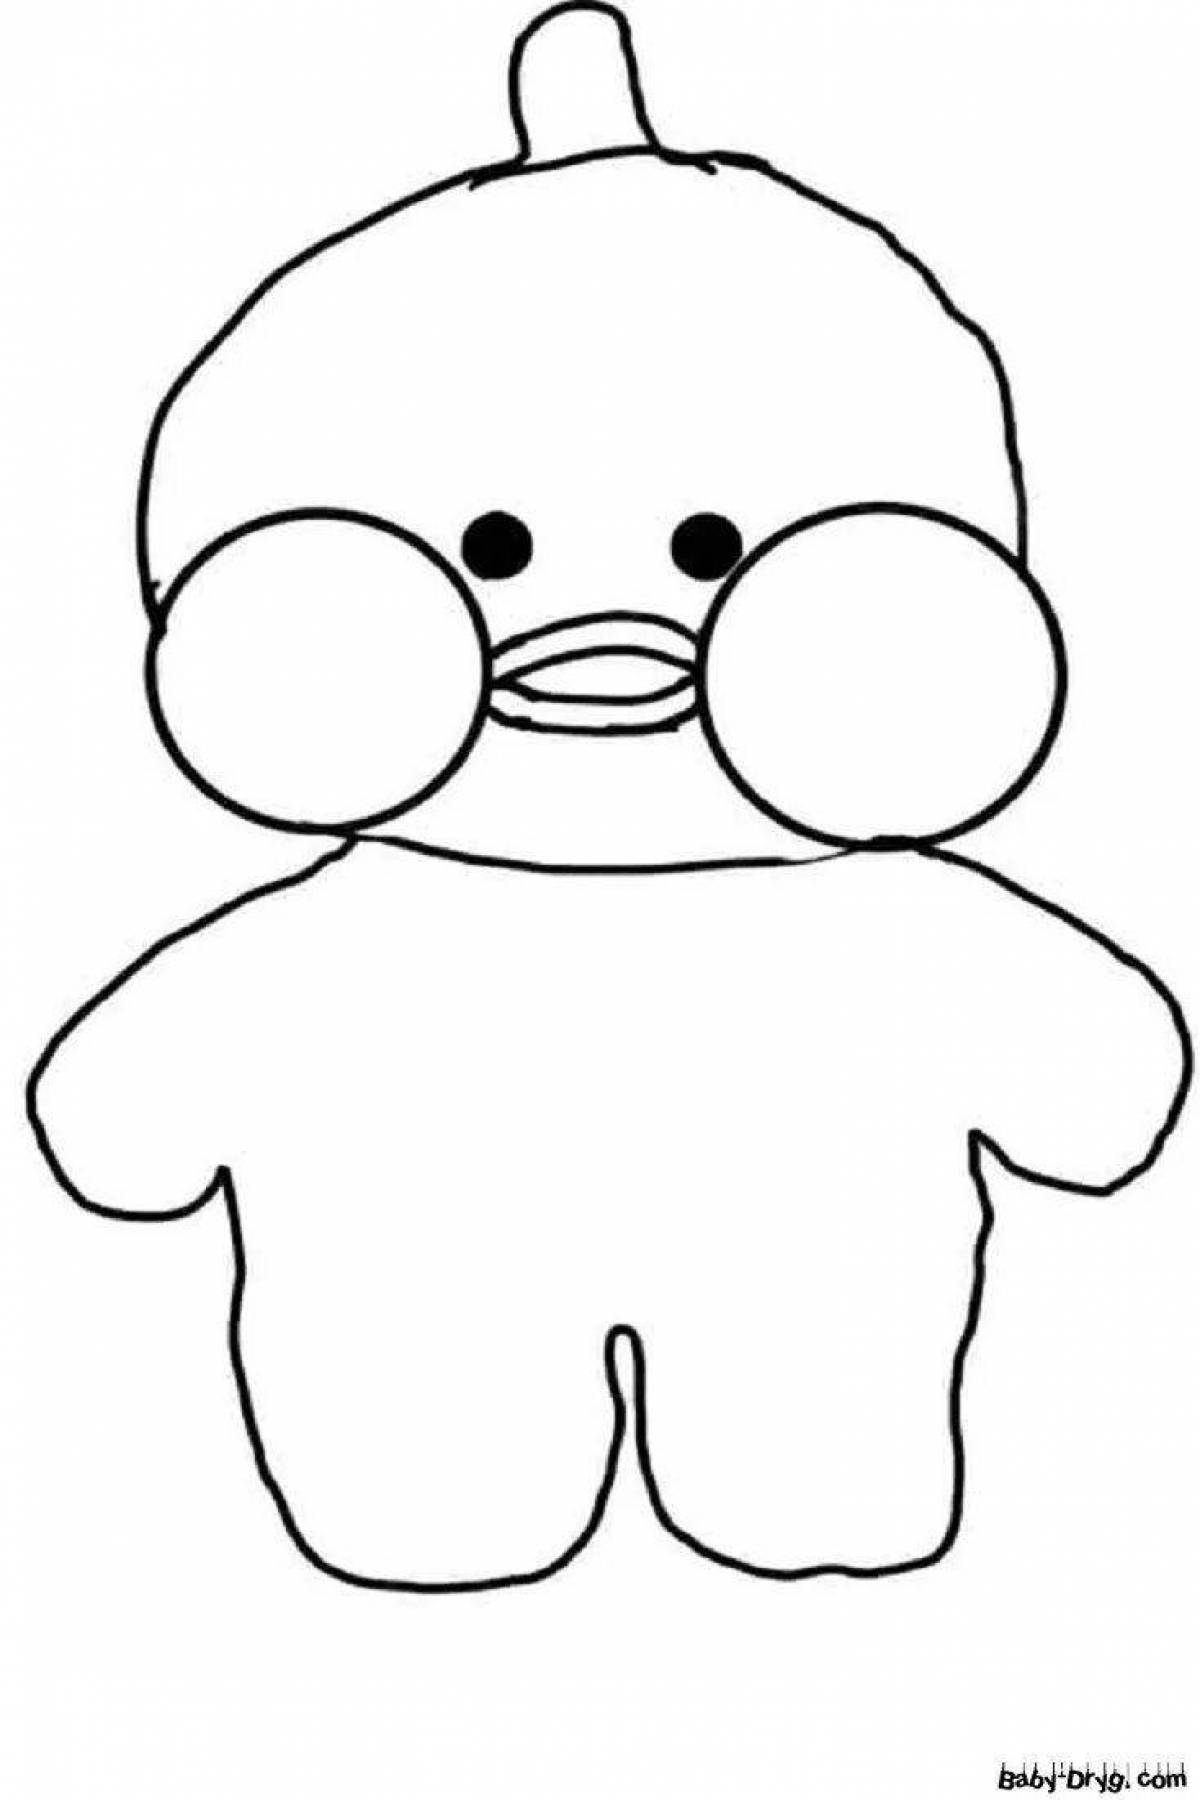 Duck lalafanfan without clothes #3